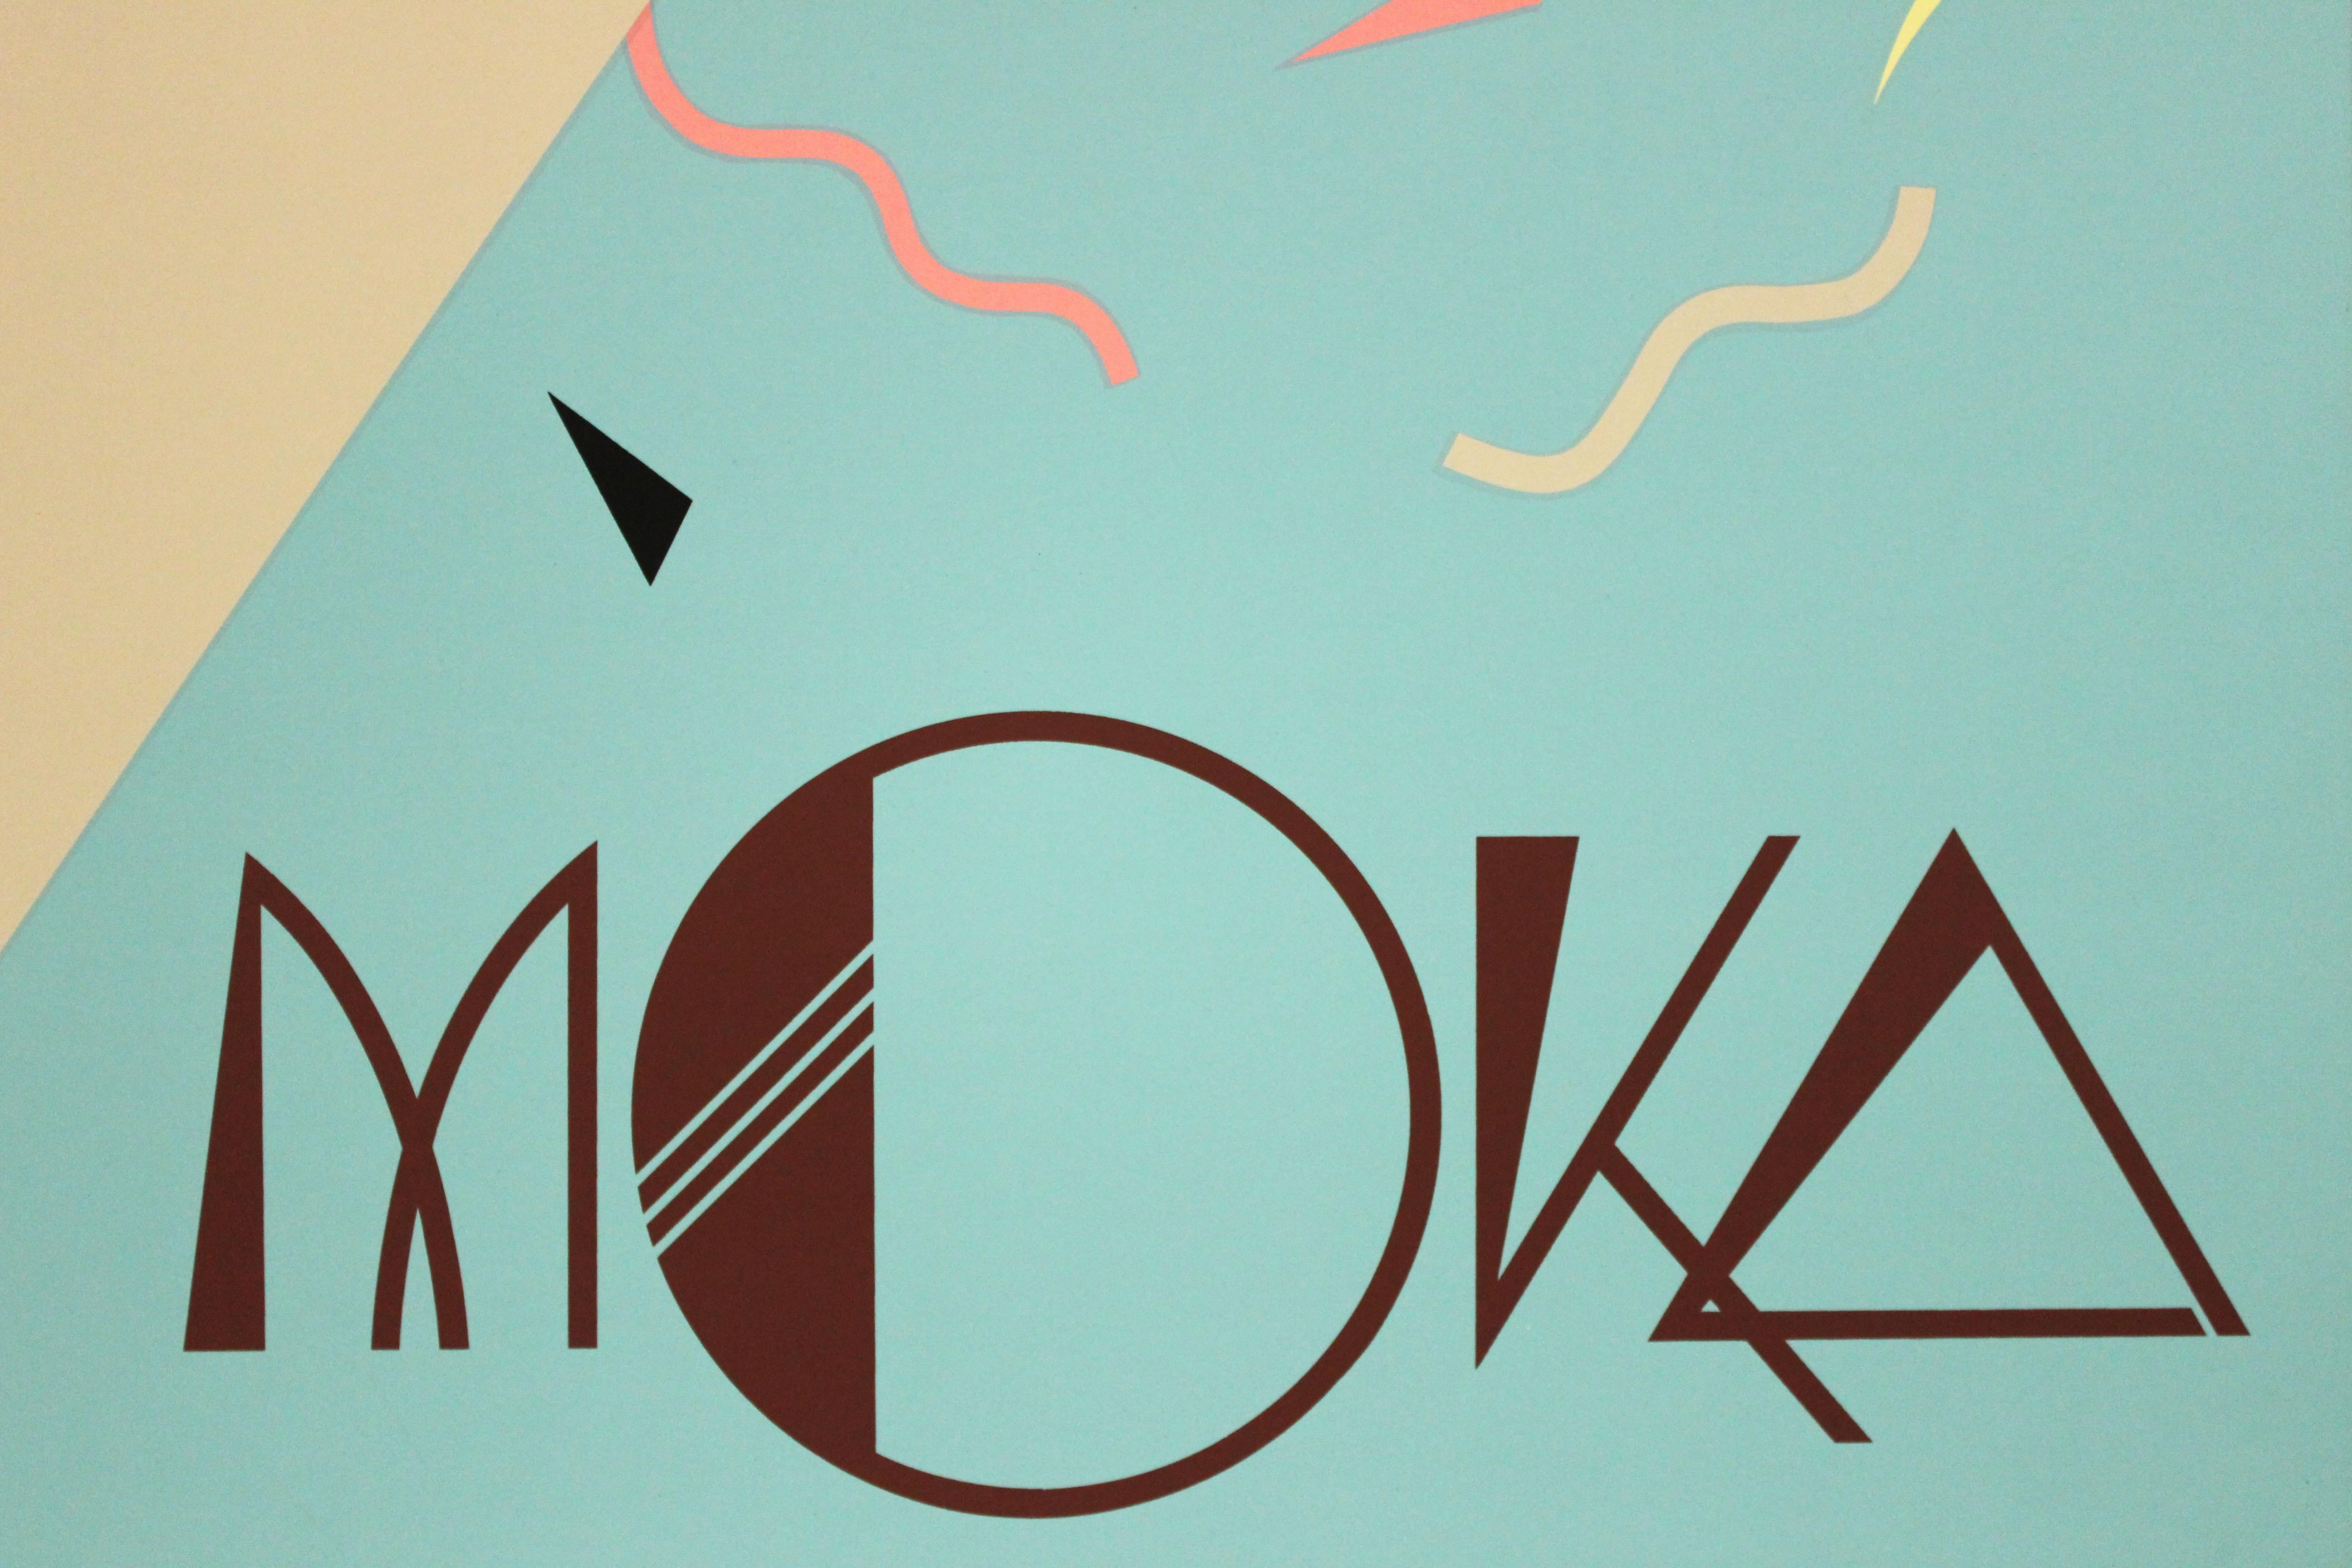 Poster-MOKA. Published & Distributed by Graphique de France - Print by Charles Lepas